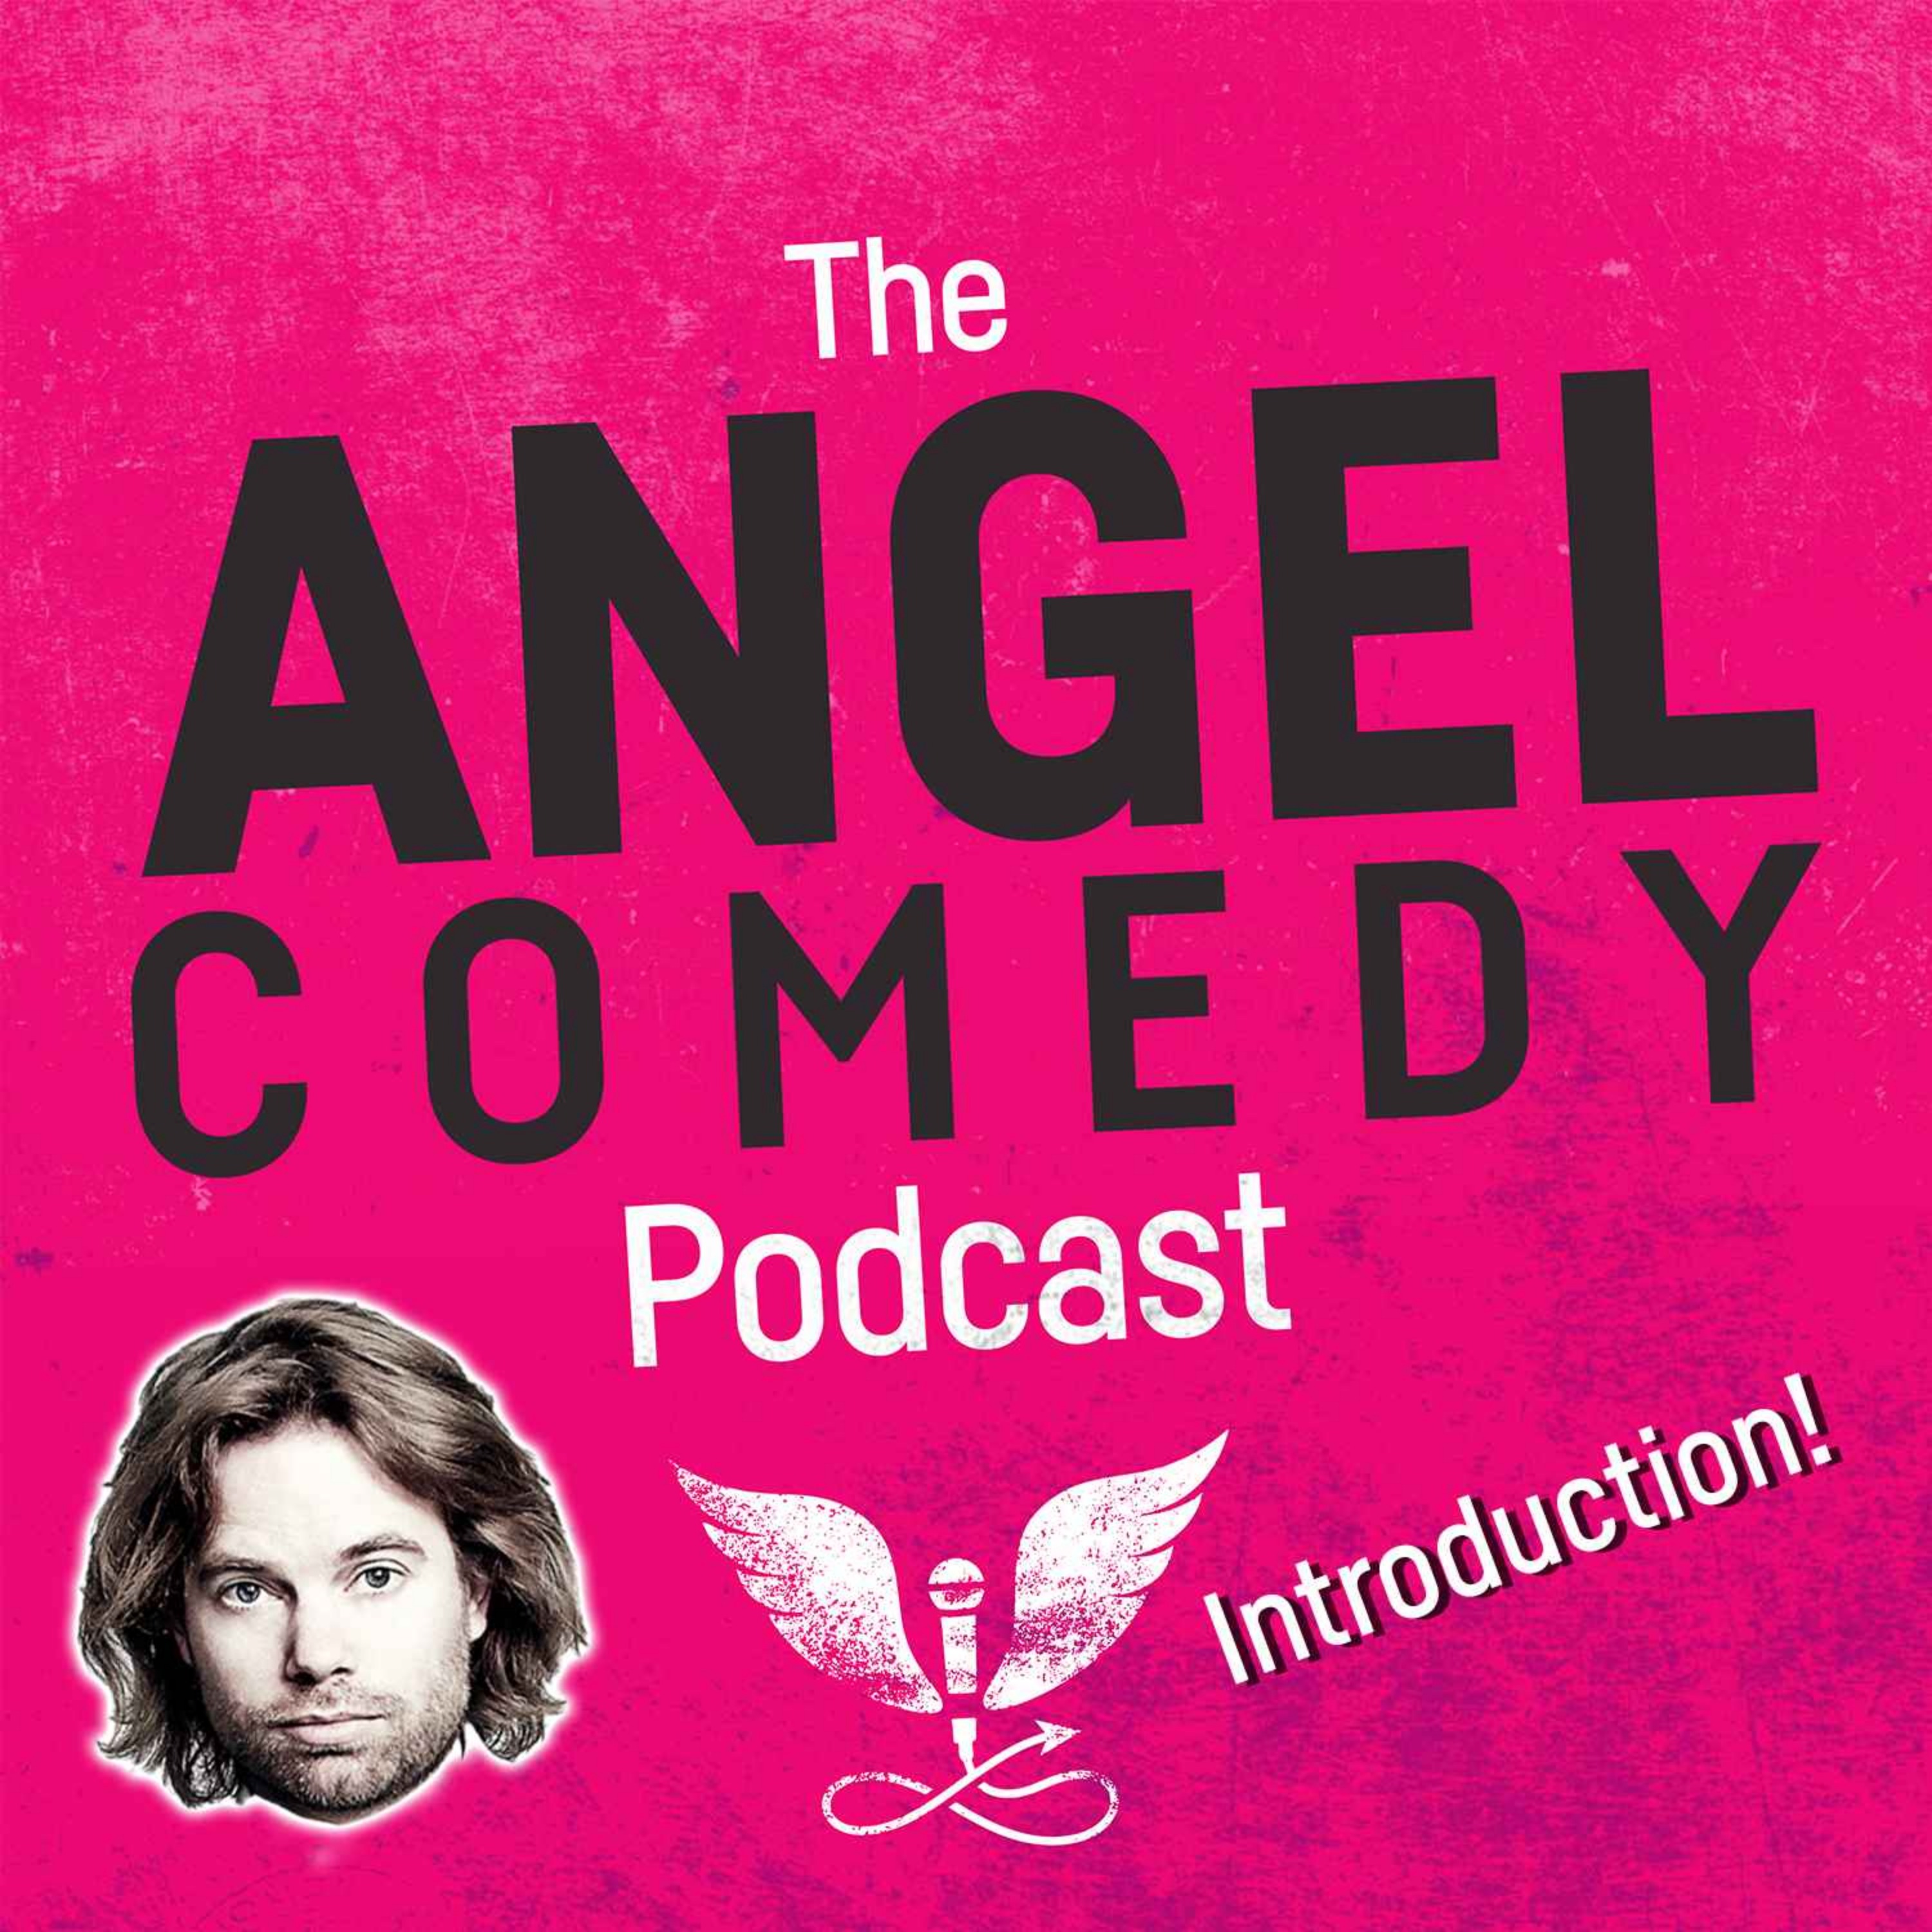 An Introduction to The Angel Comedy Podcast